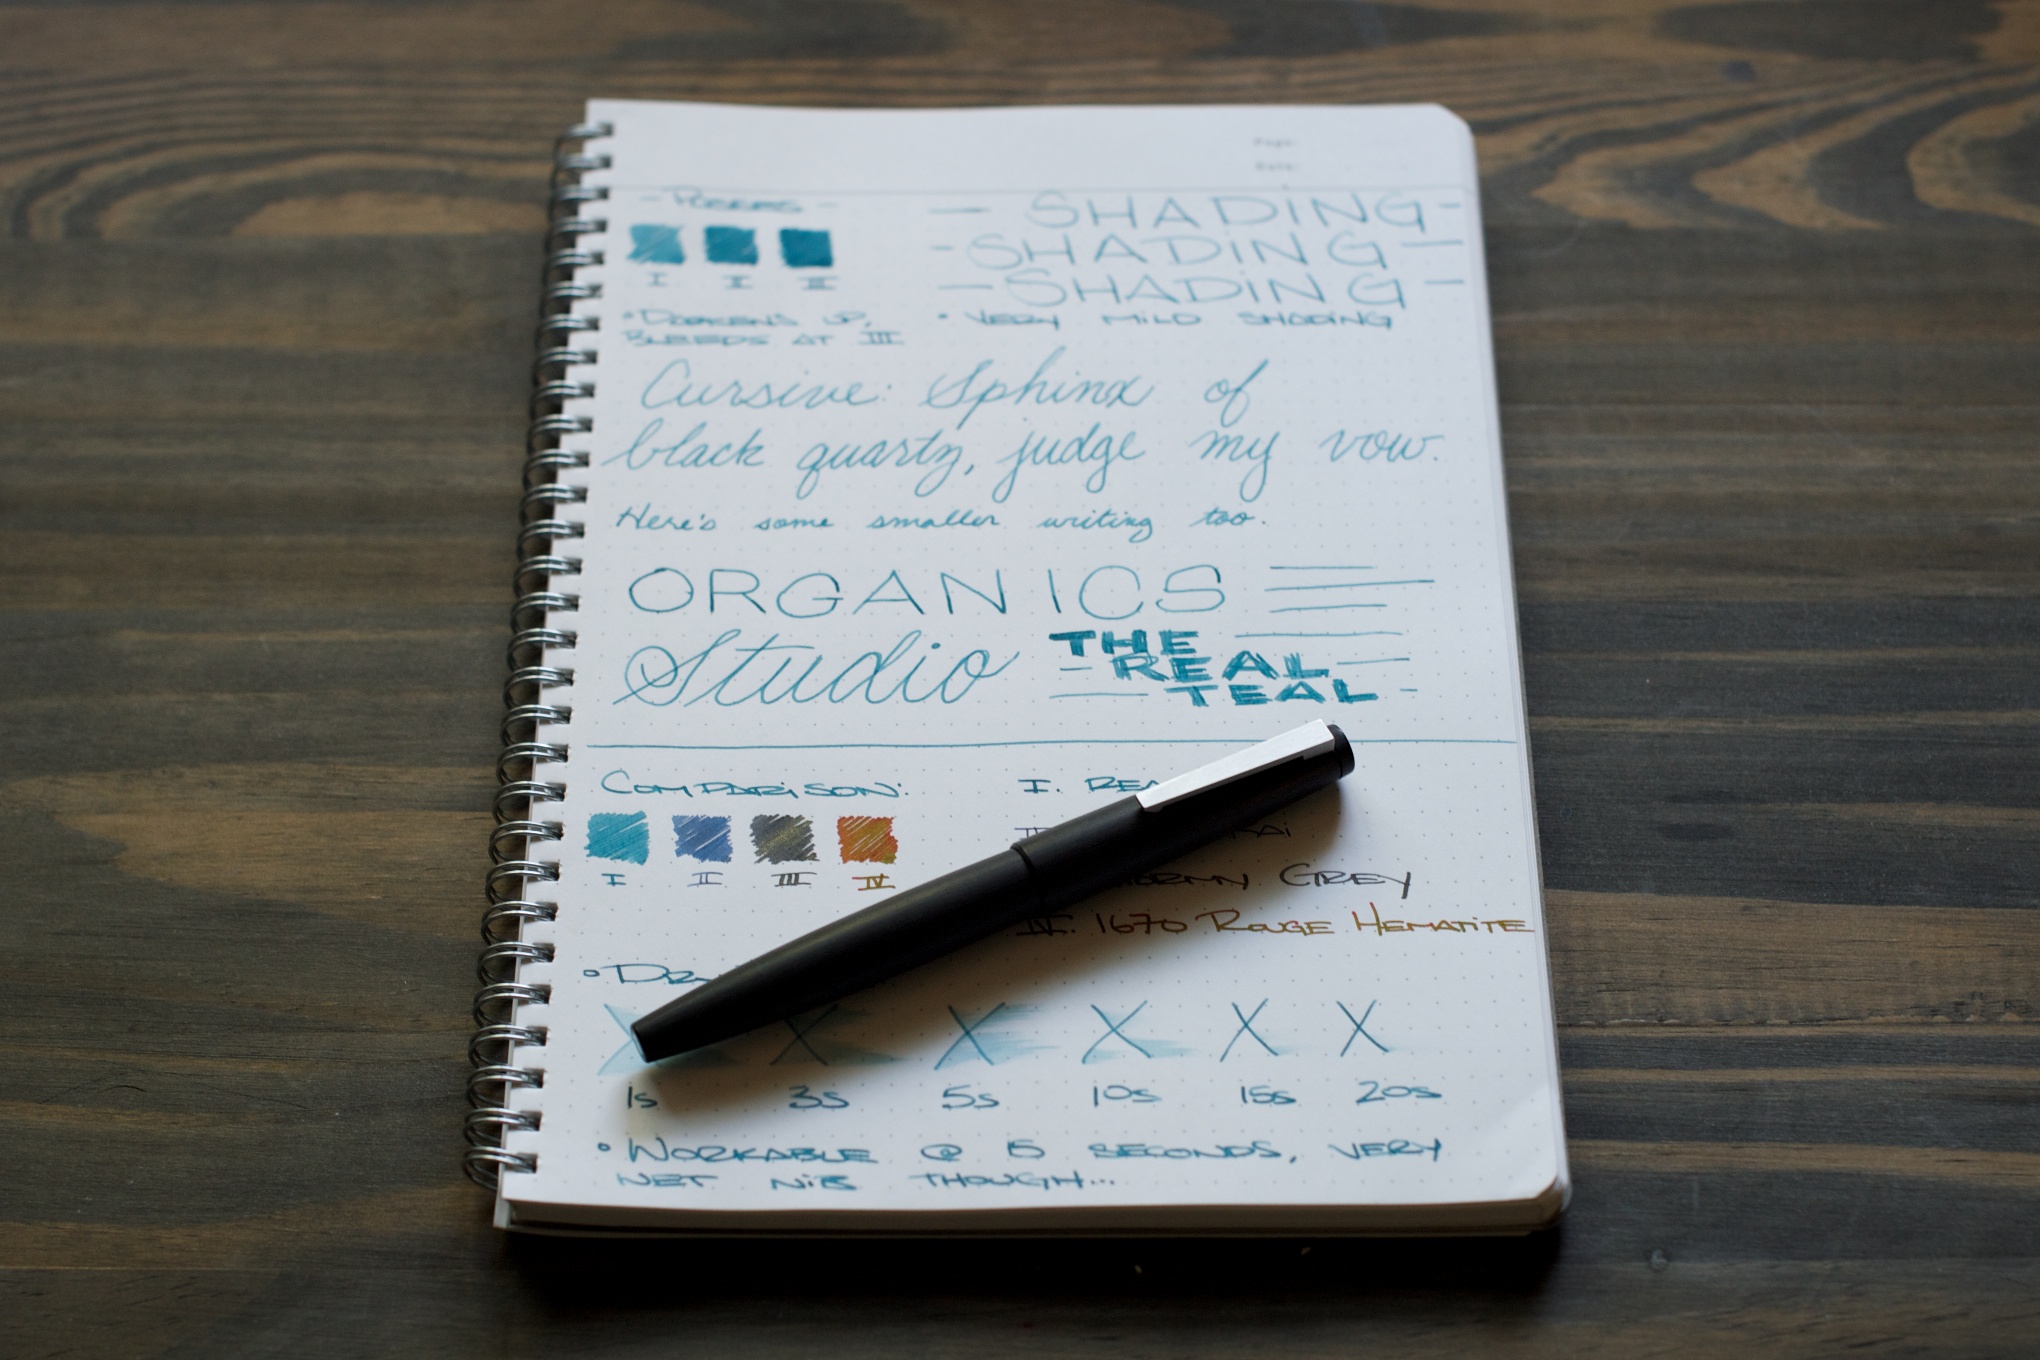 Organics Studio The Real Teal – Ink Review